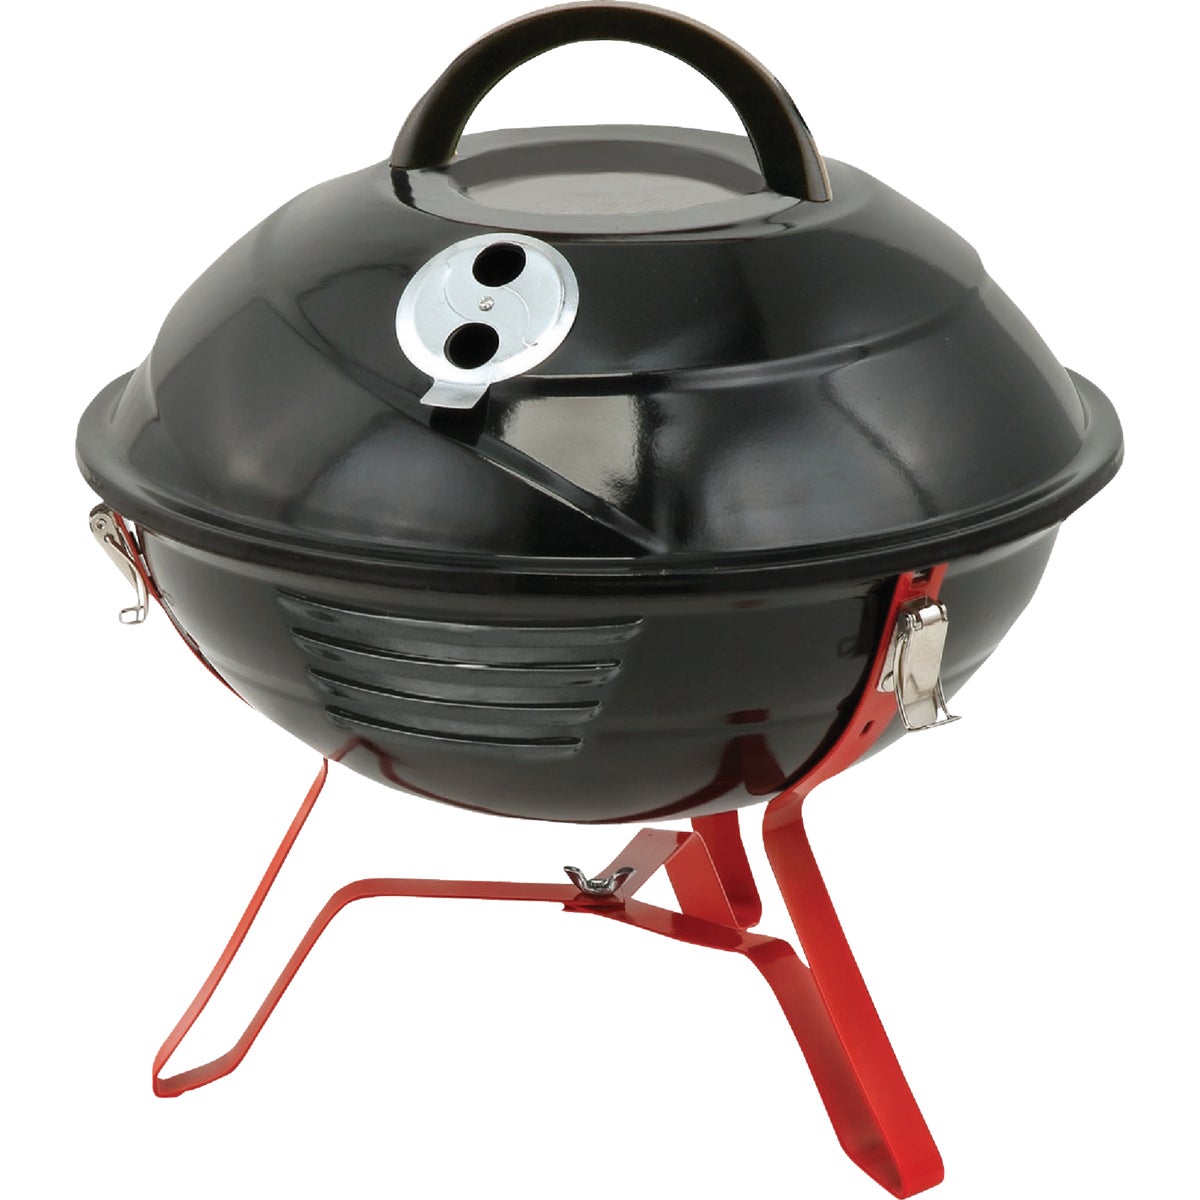 Item 819467, The Vortex tabletop charcoal grill has easy-to-clean baked porcelain enamel